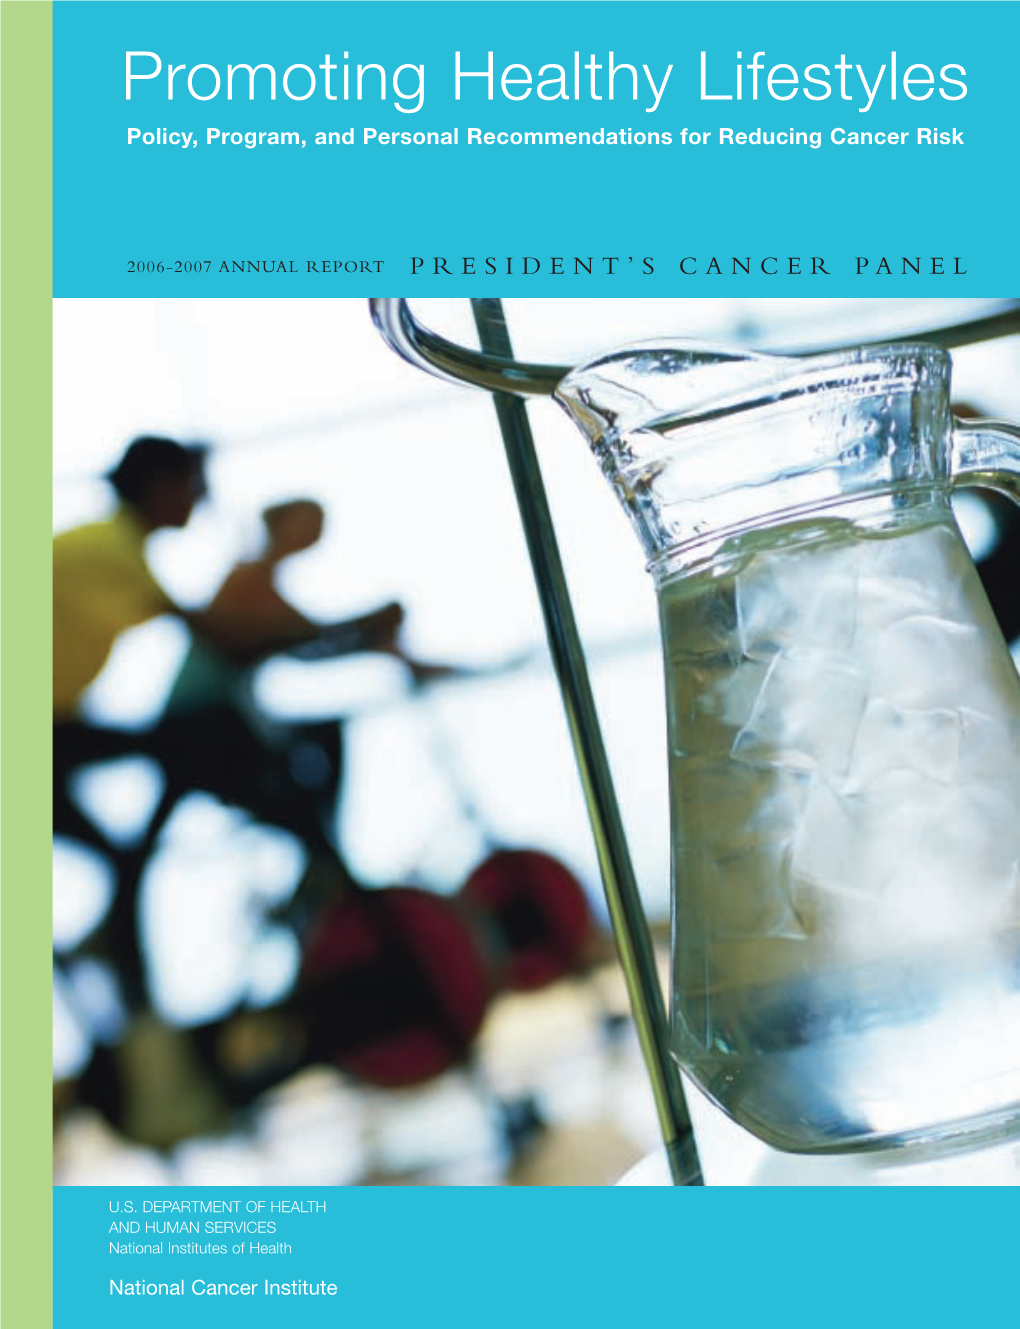 Promoting Healthy Lifestyles Policy, Program, and Personal Recommendations for Reducing Cancer Risk